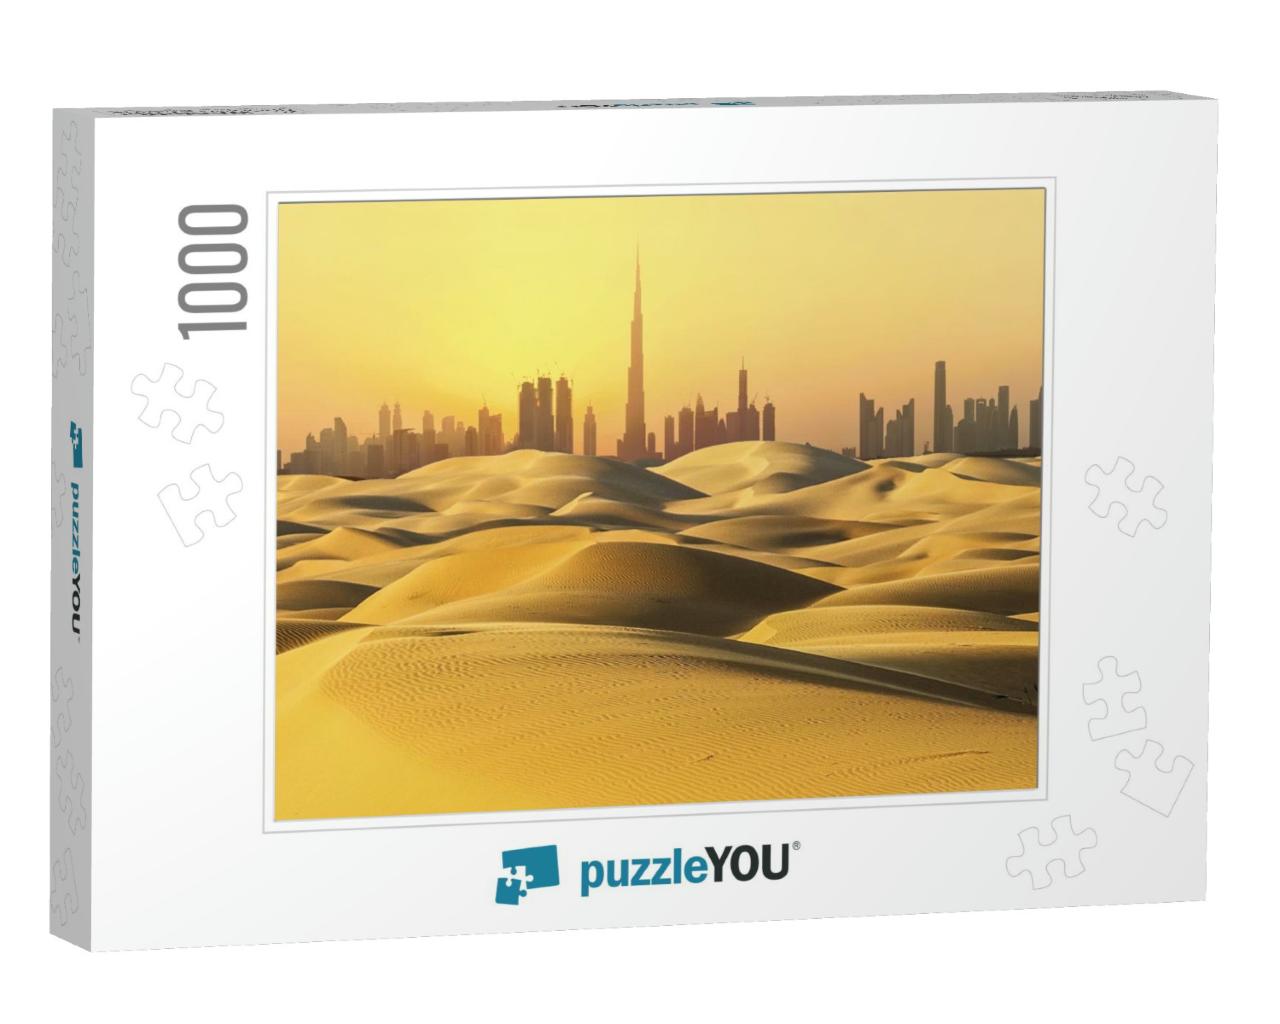 Dubai Skyline in Desert At Sunset... Jigsaw Puzzle with 1000 pieces